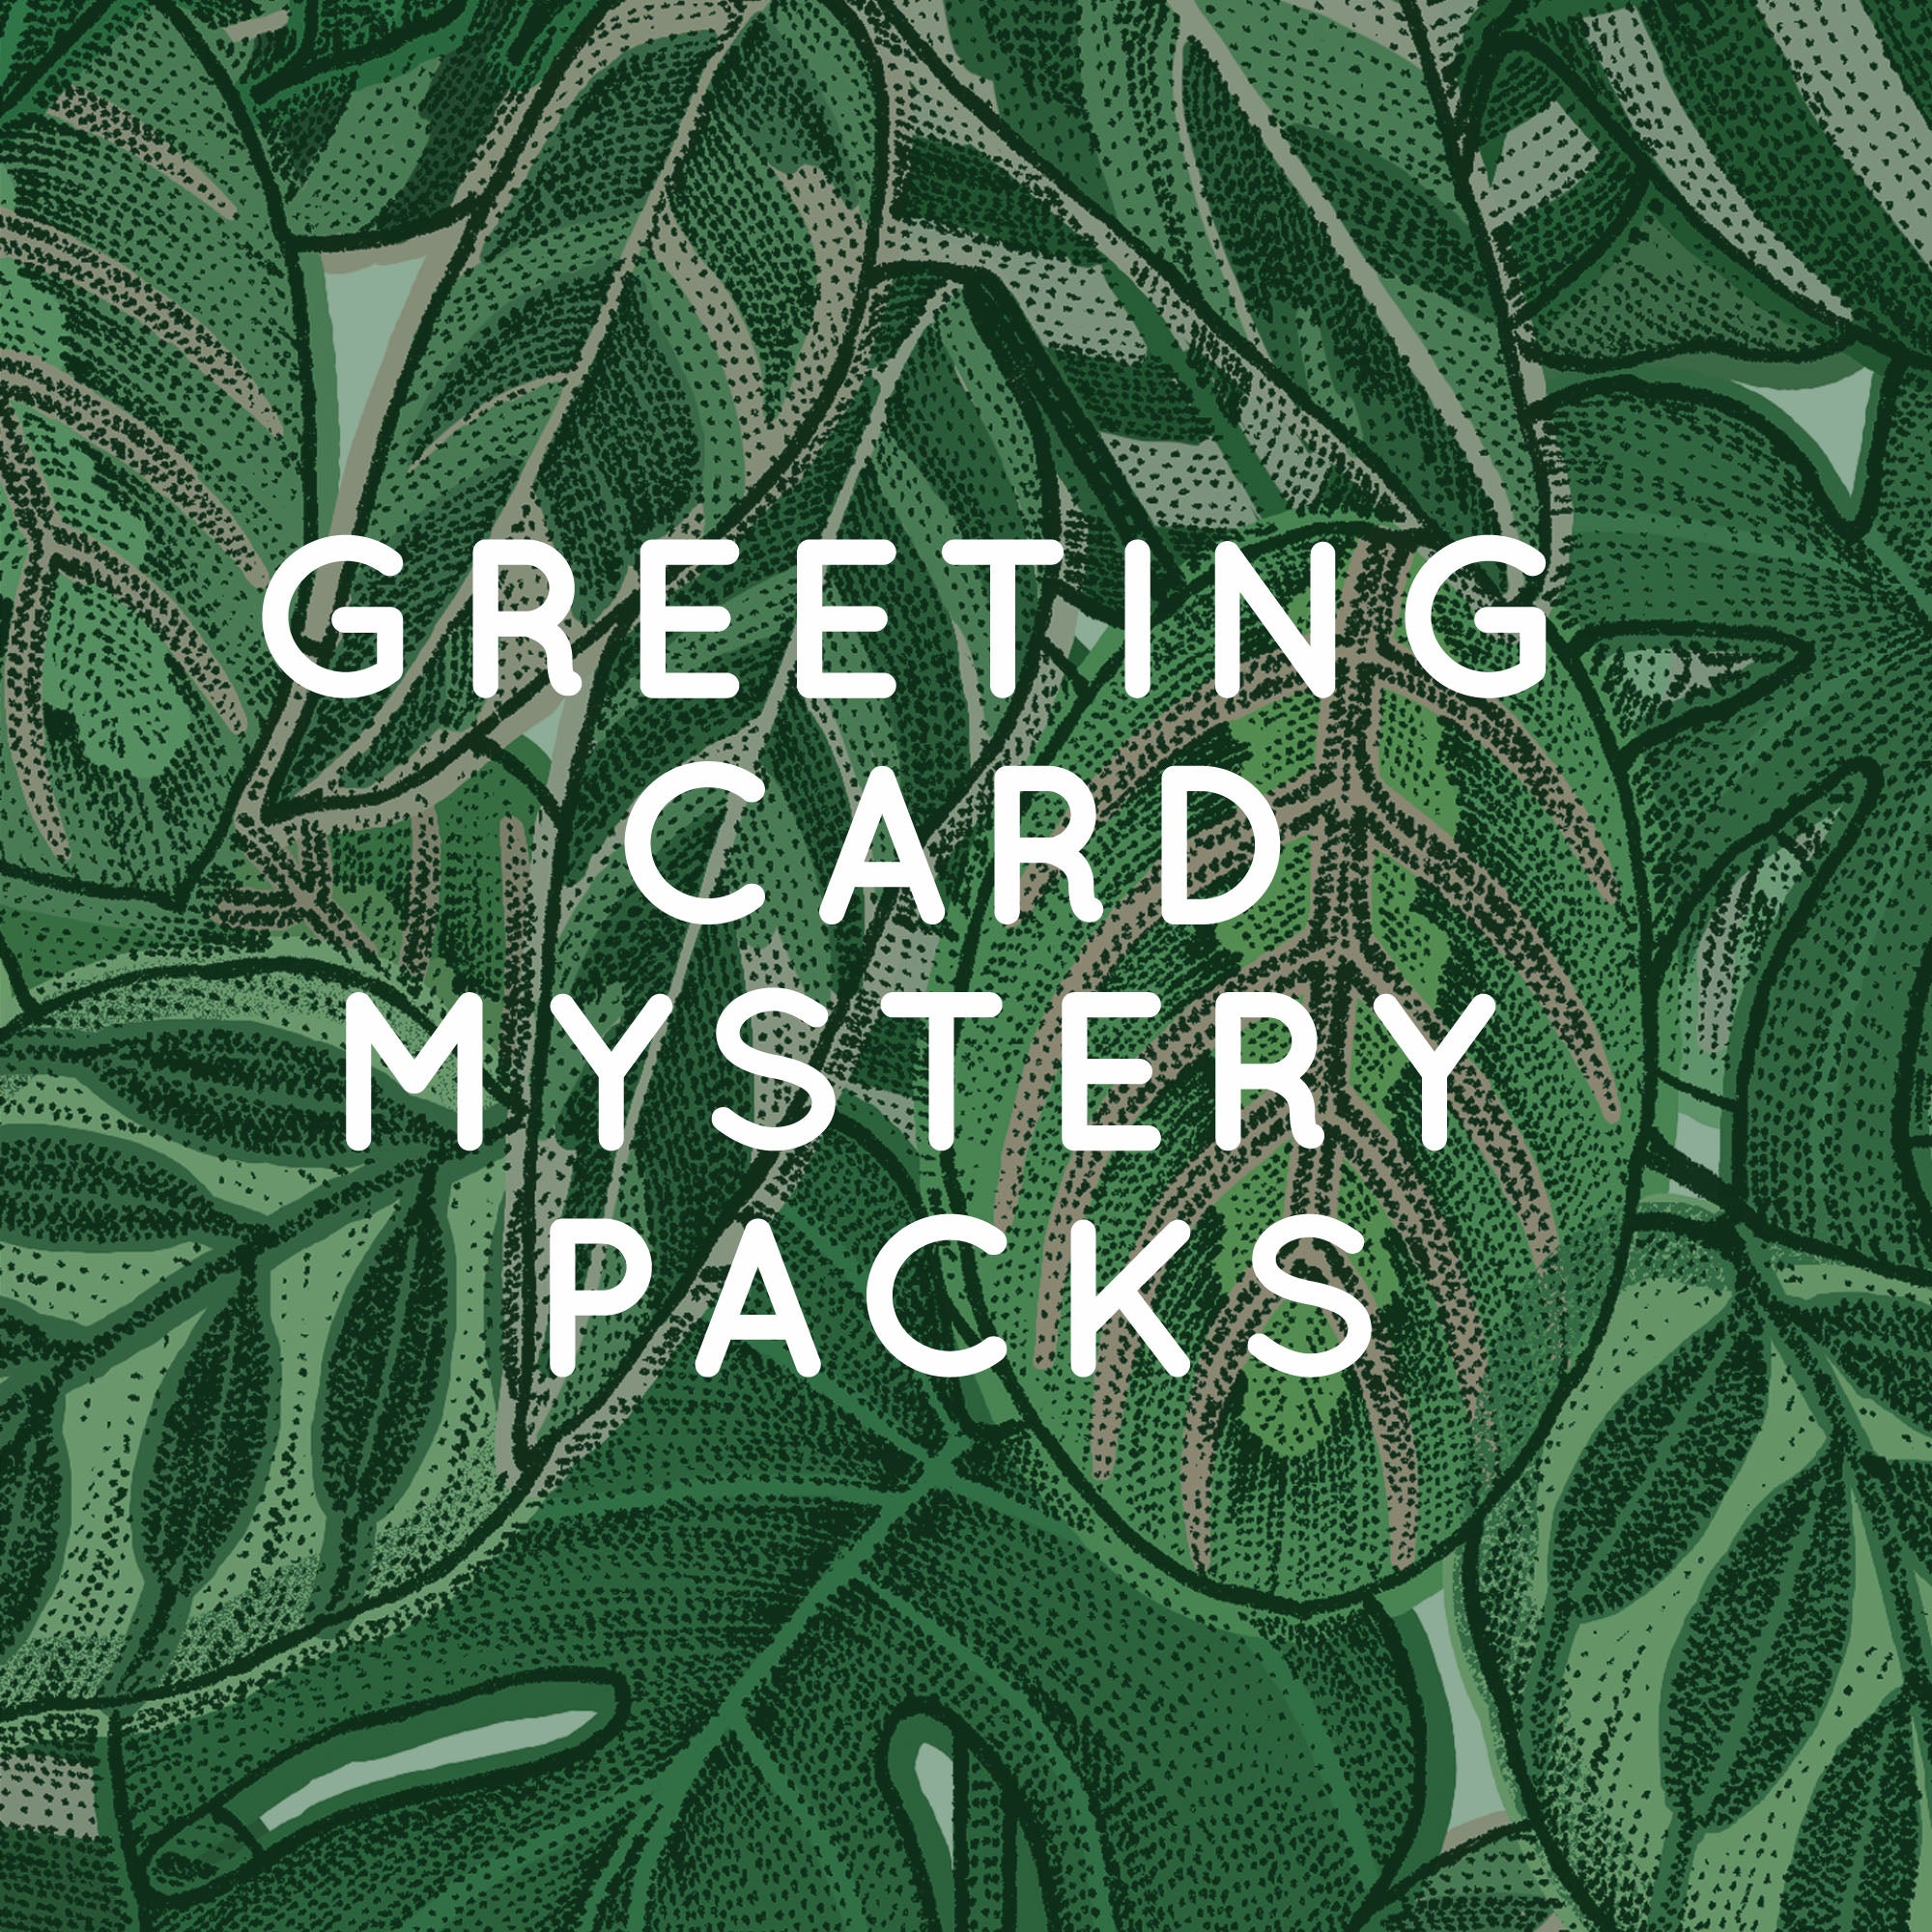 Greeting Card Mystery Packs!